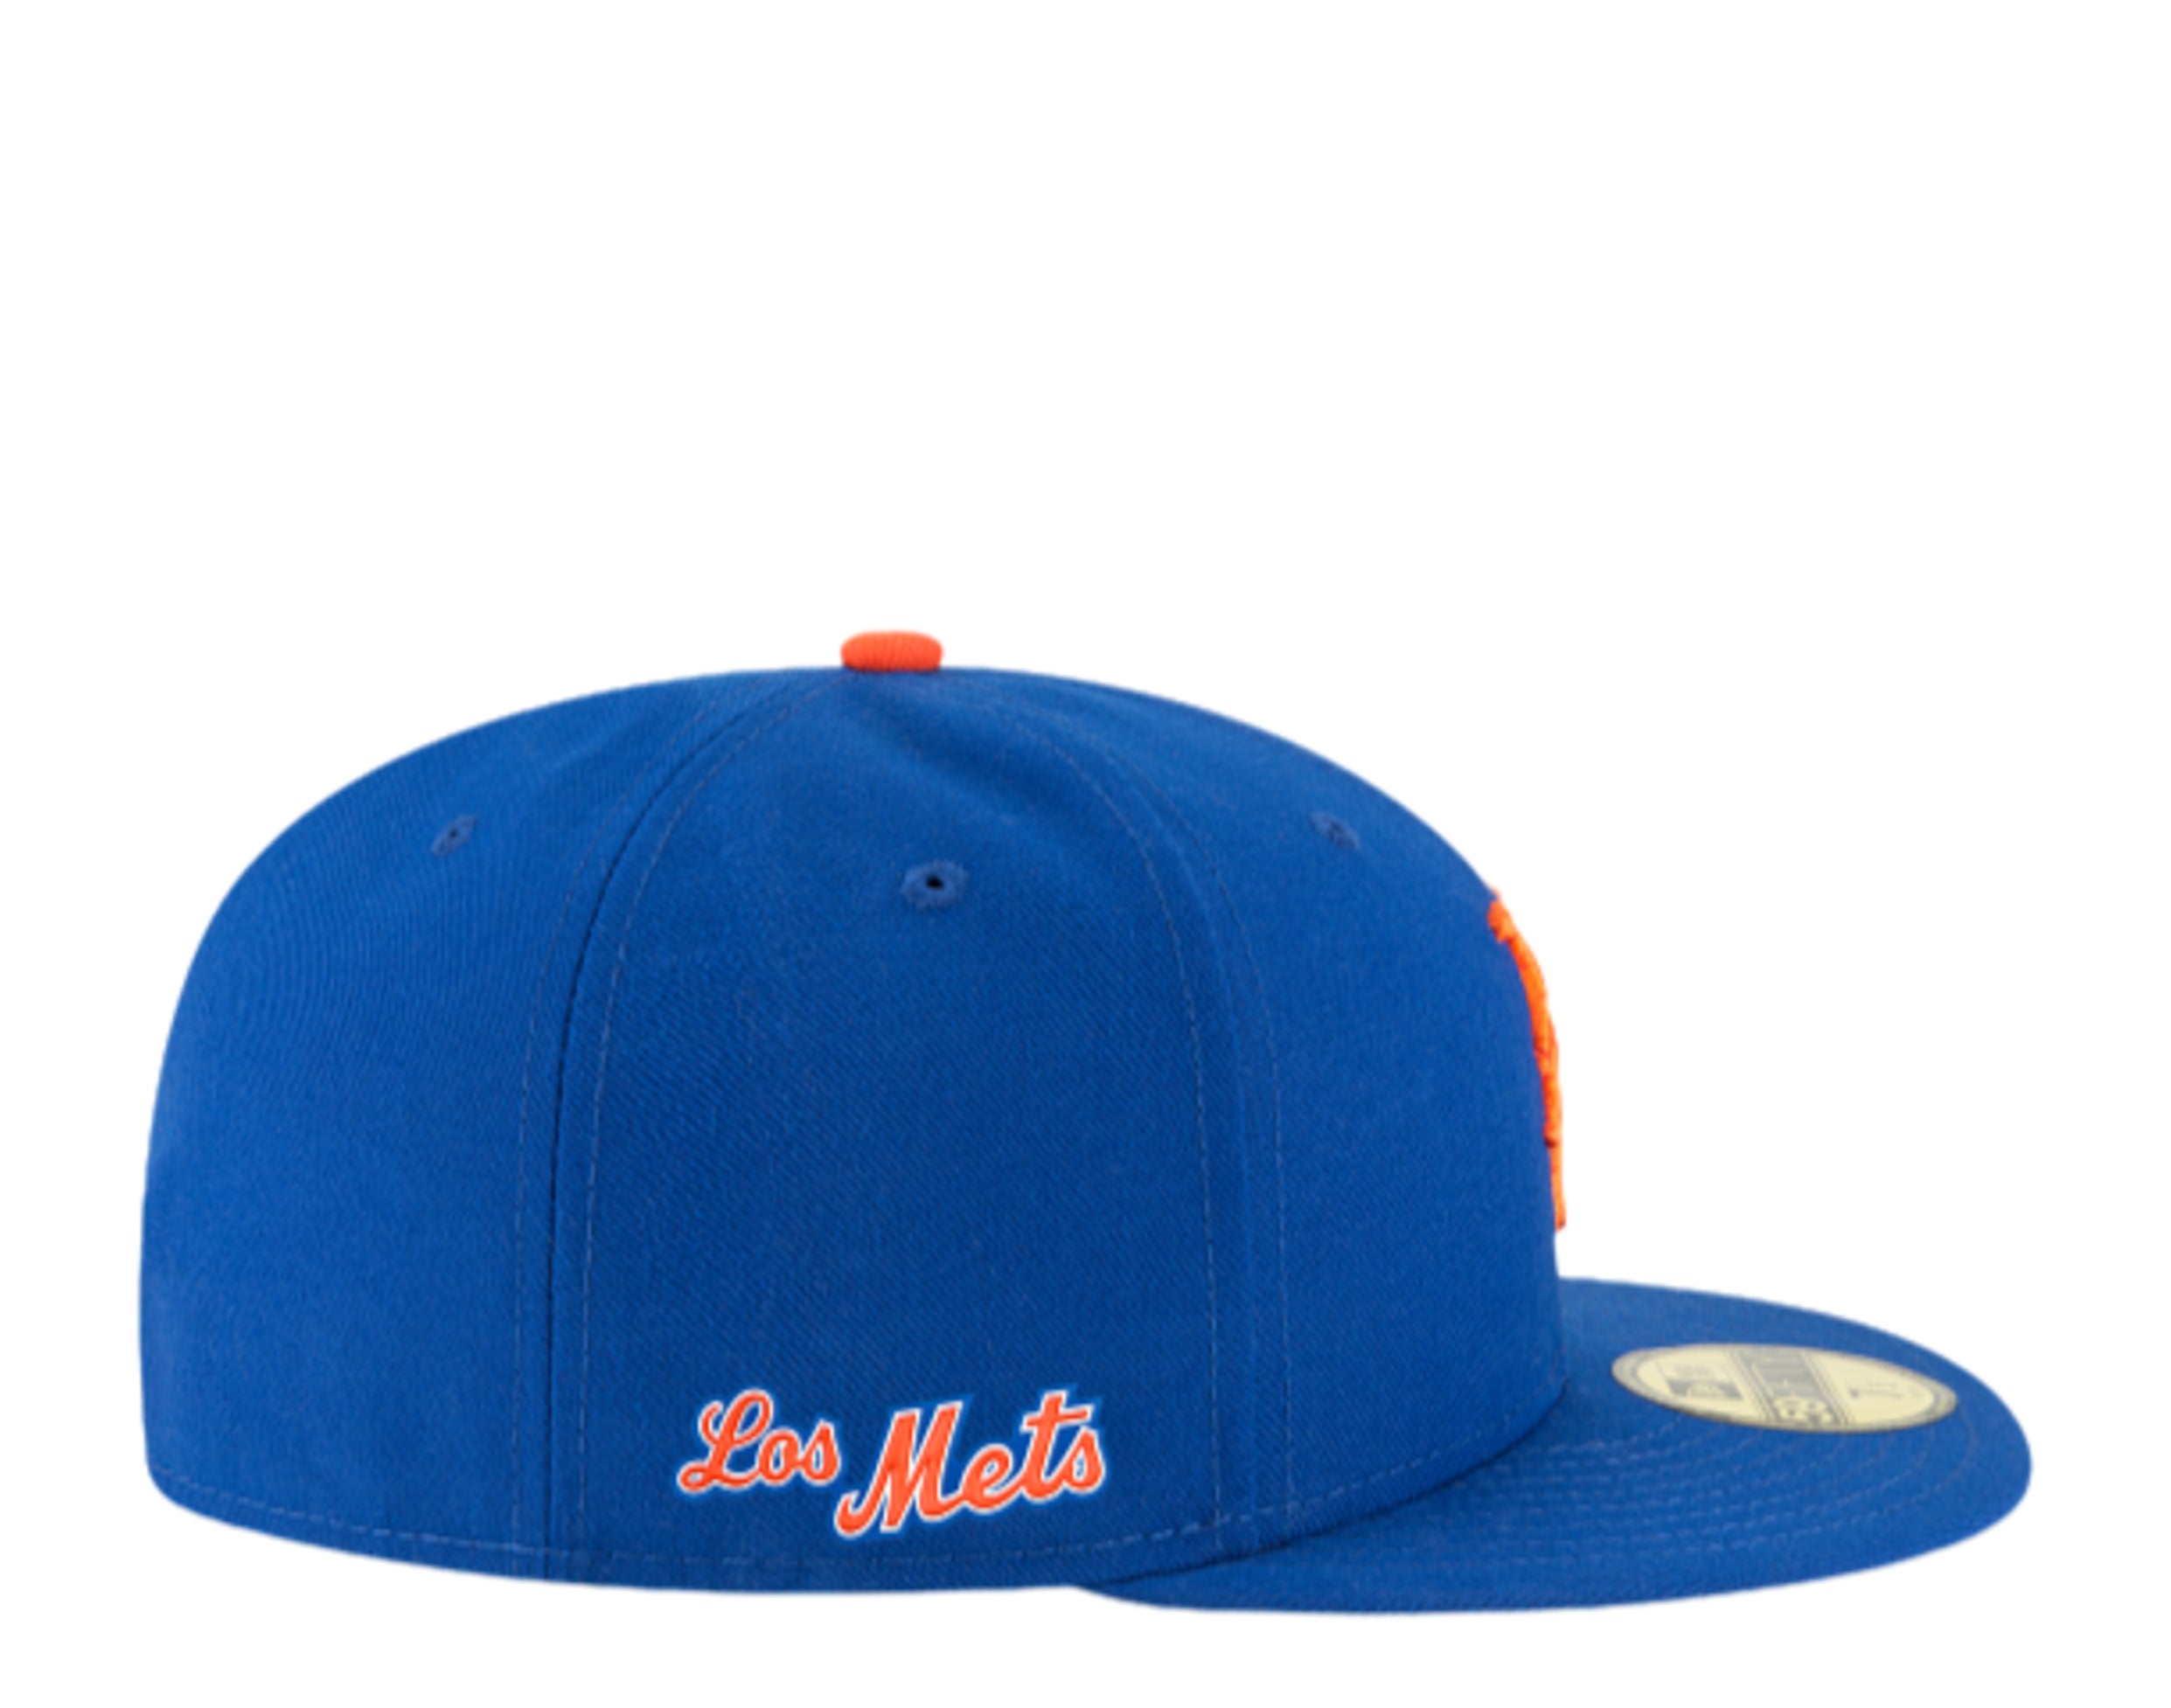 New Era New York Mets Ocean Drive Shea Stadium Patch Hat Club Exclusive 59Fifty Fitted Hat Stone/Indigo/Peach